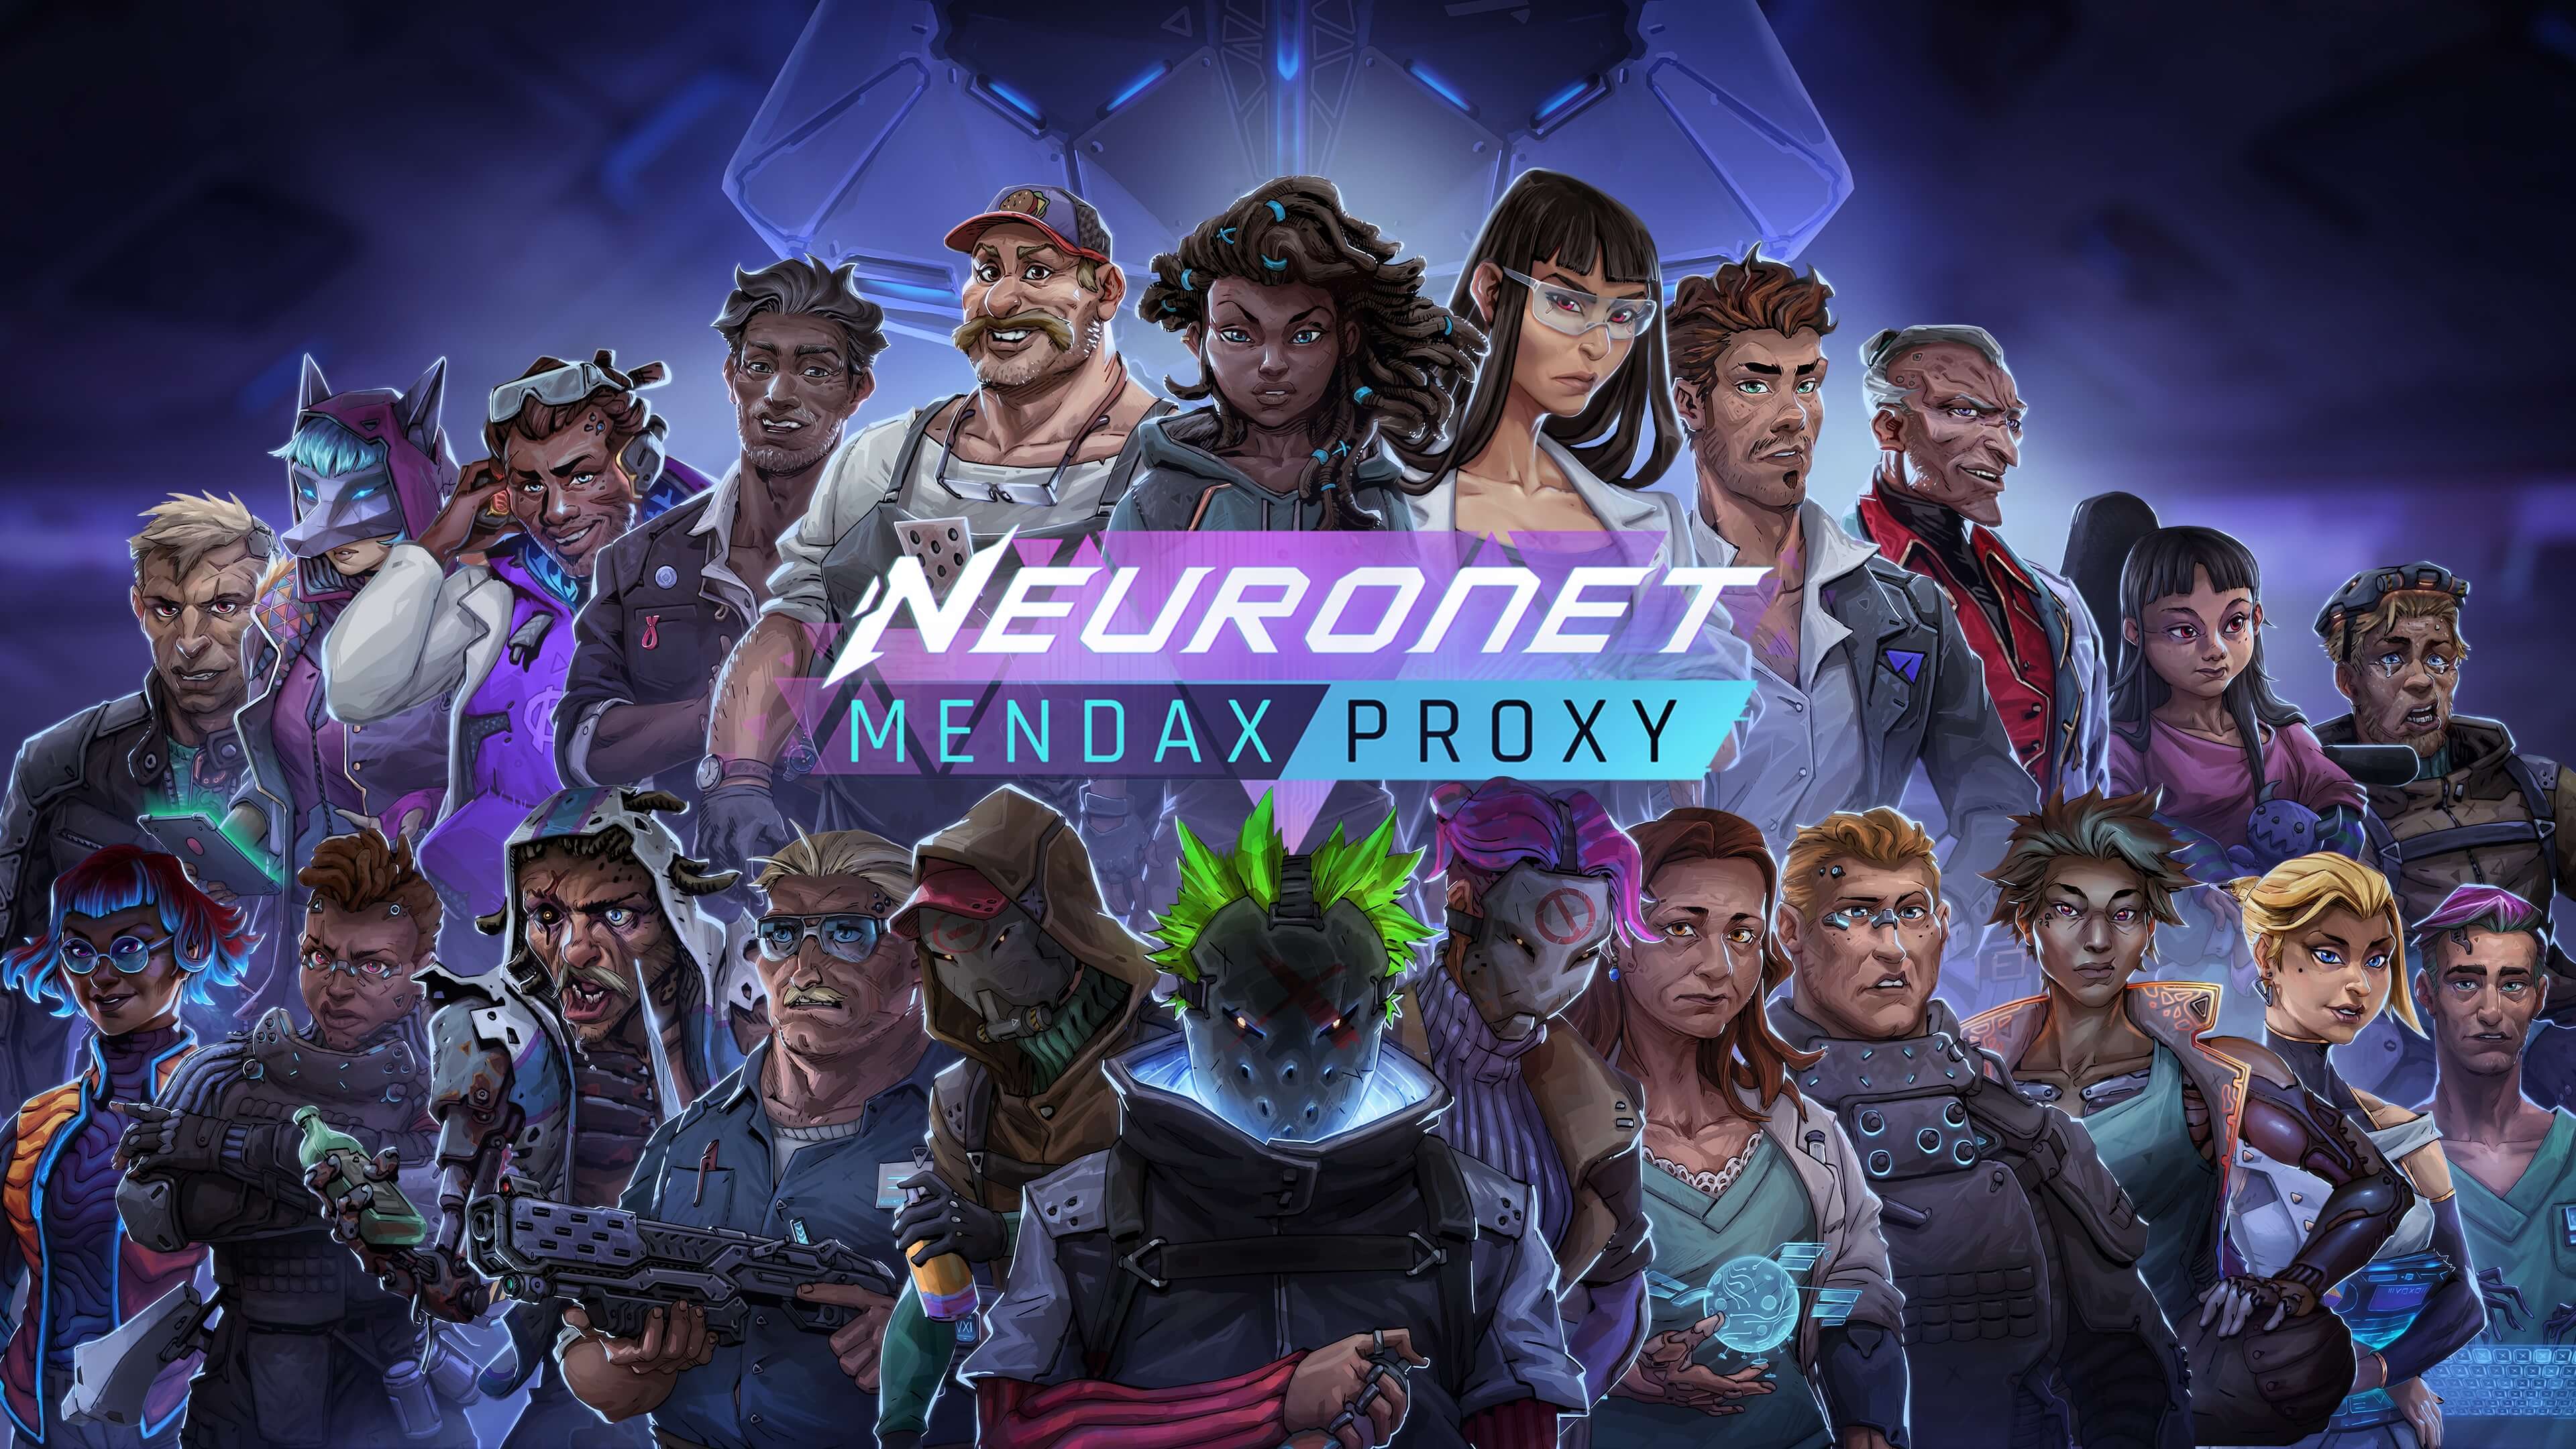 <img src="Dream Harvest_Hiring Diverse Voice Over Talent For Games_01_3840x2160.jpg" alt="Image of all the characters within NeuroNet: Mendax Proxy">